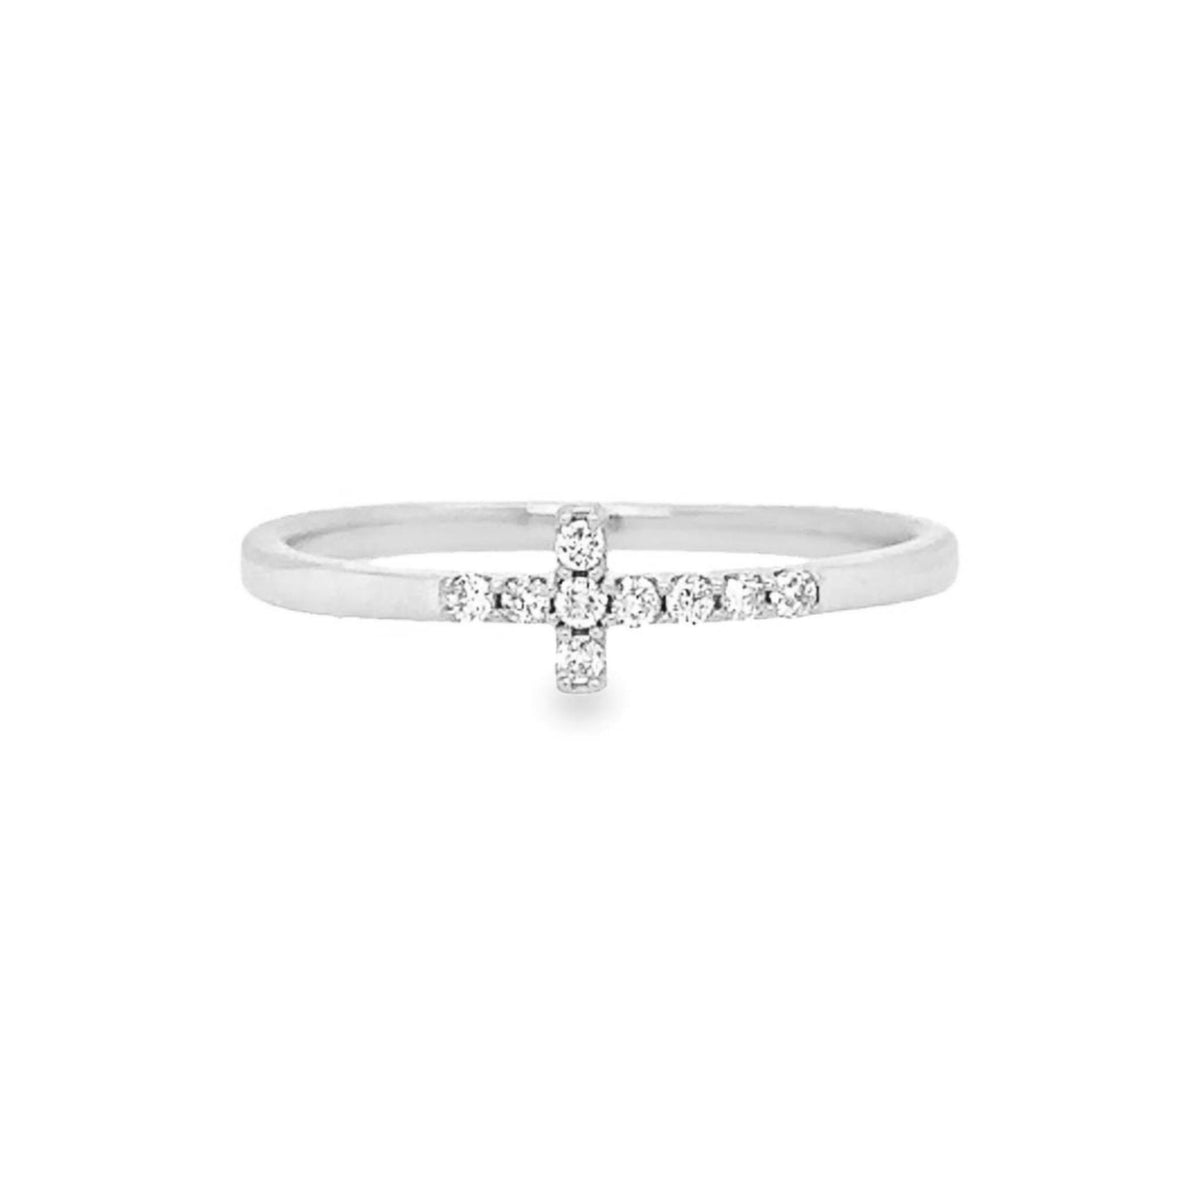 10Kt White Gold Geometric Fashion Ring With 0.20cttw Natural Diamonds